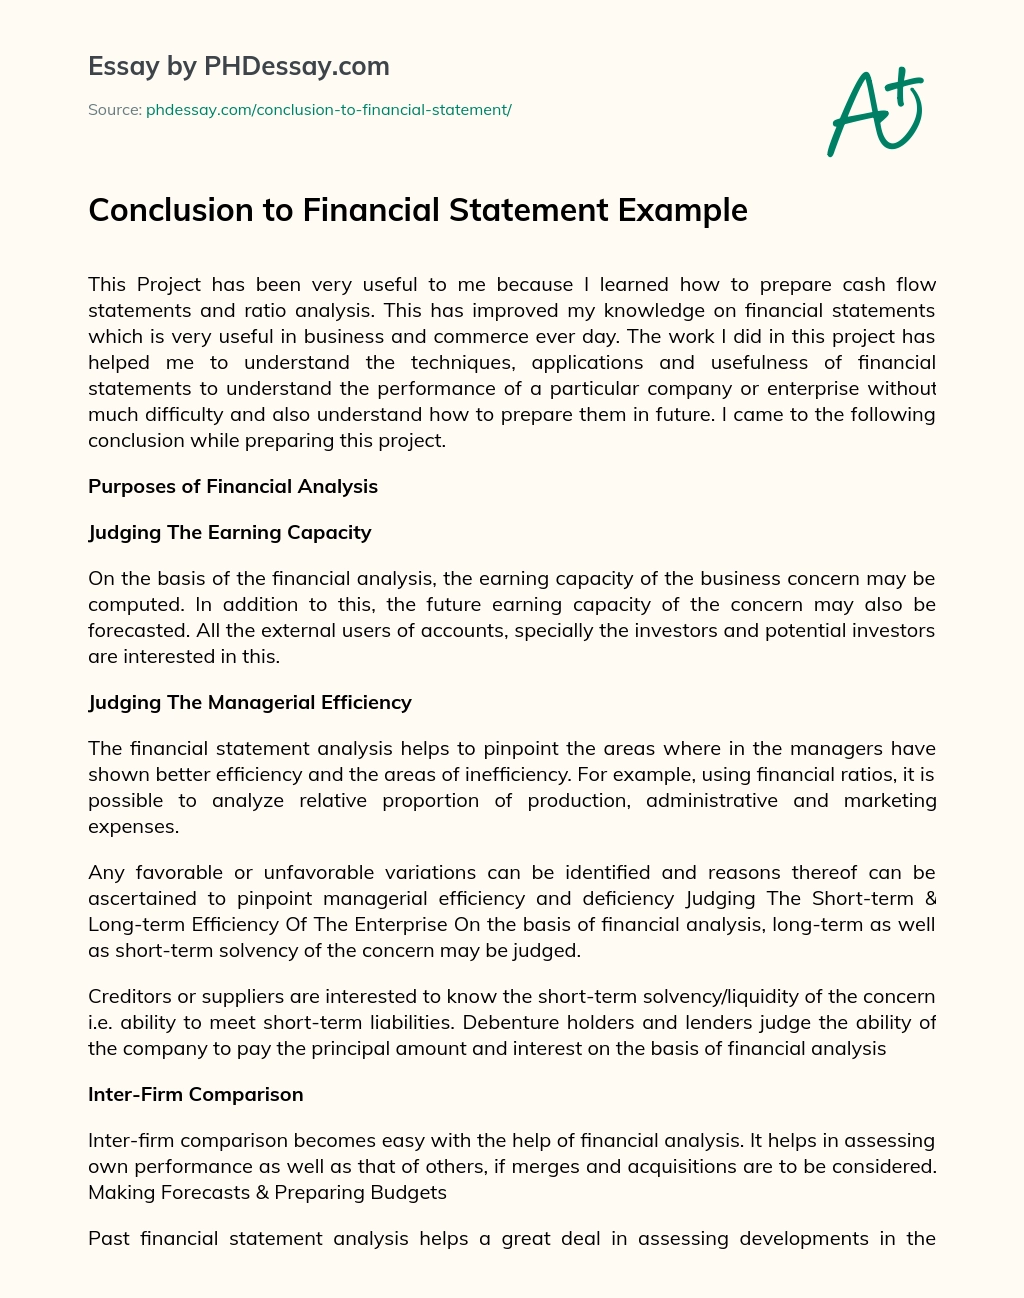 conclusion of financial statement analysis